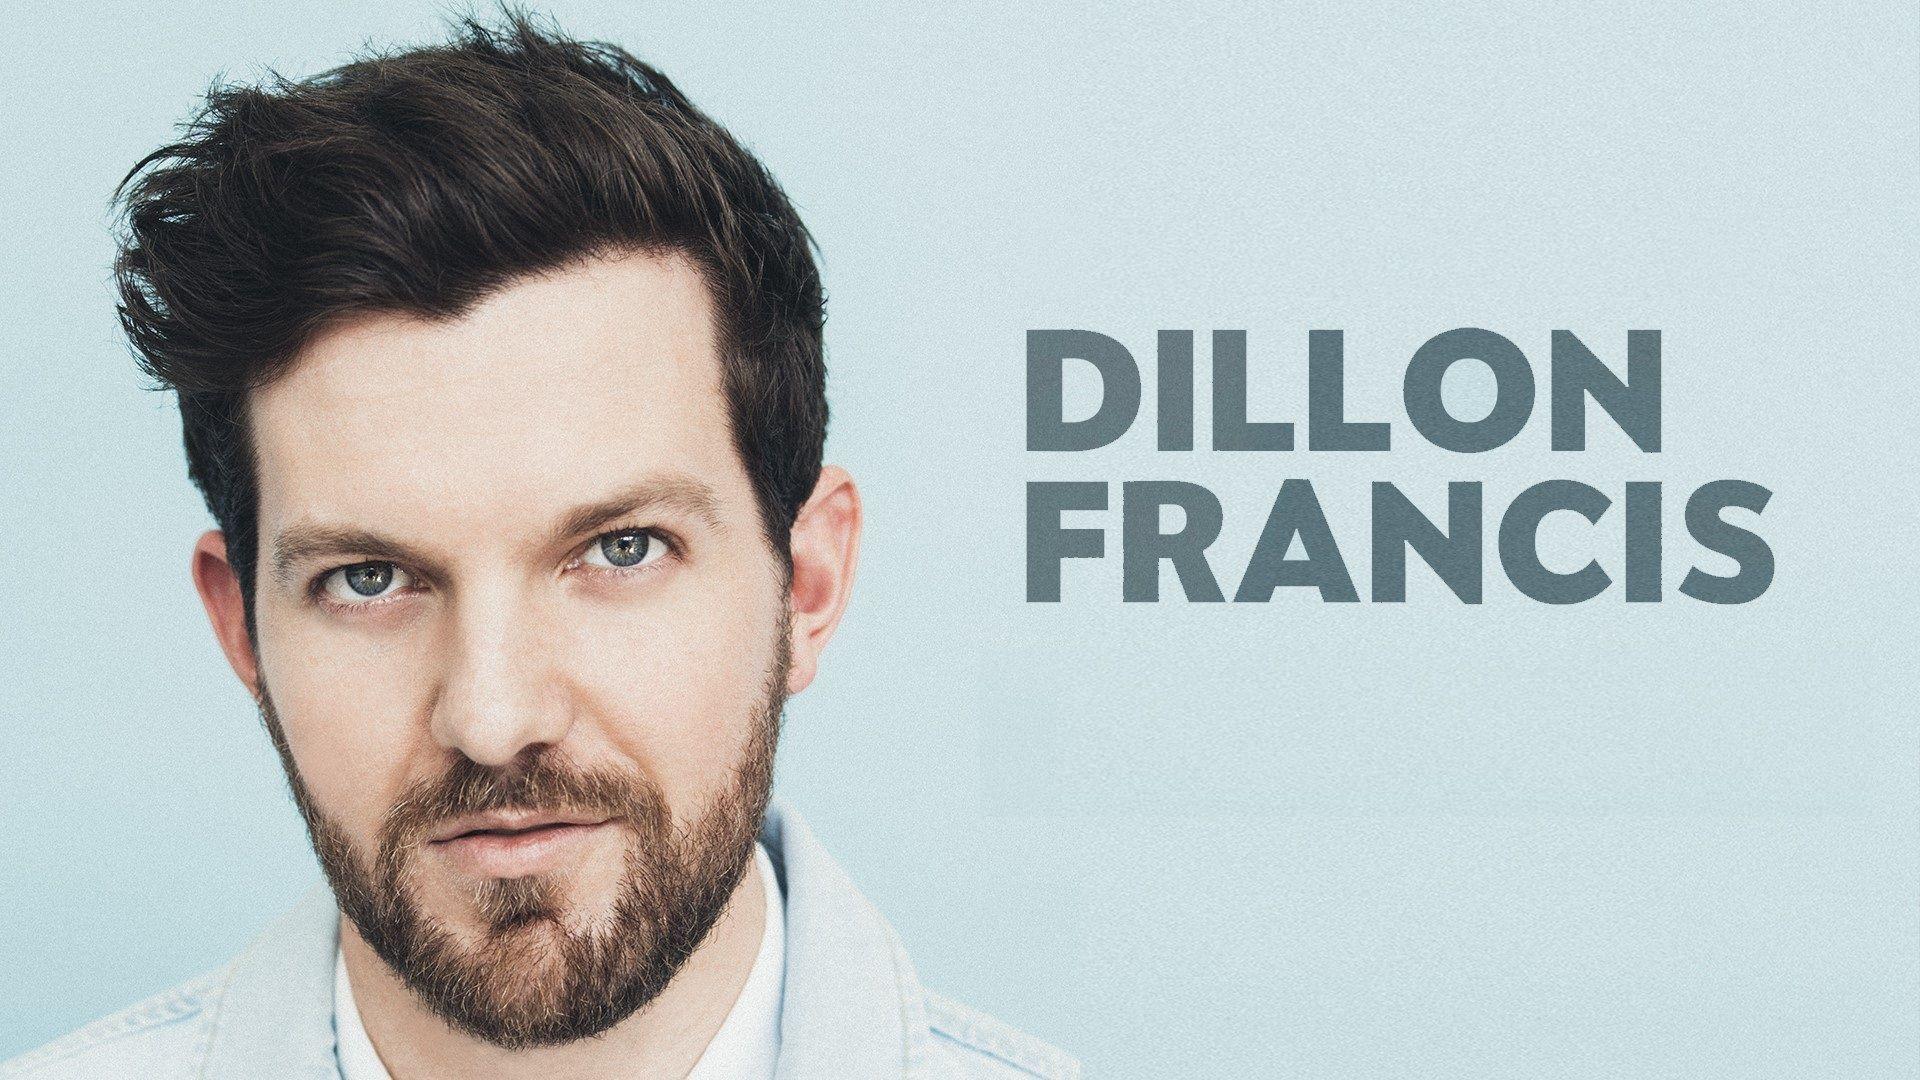 Dillon Francis Wallpaper Image Photo Picture Background